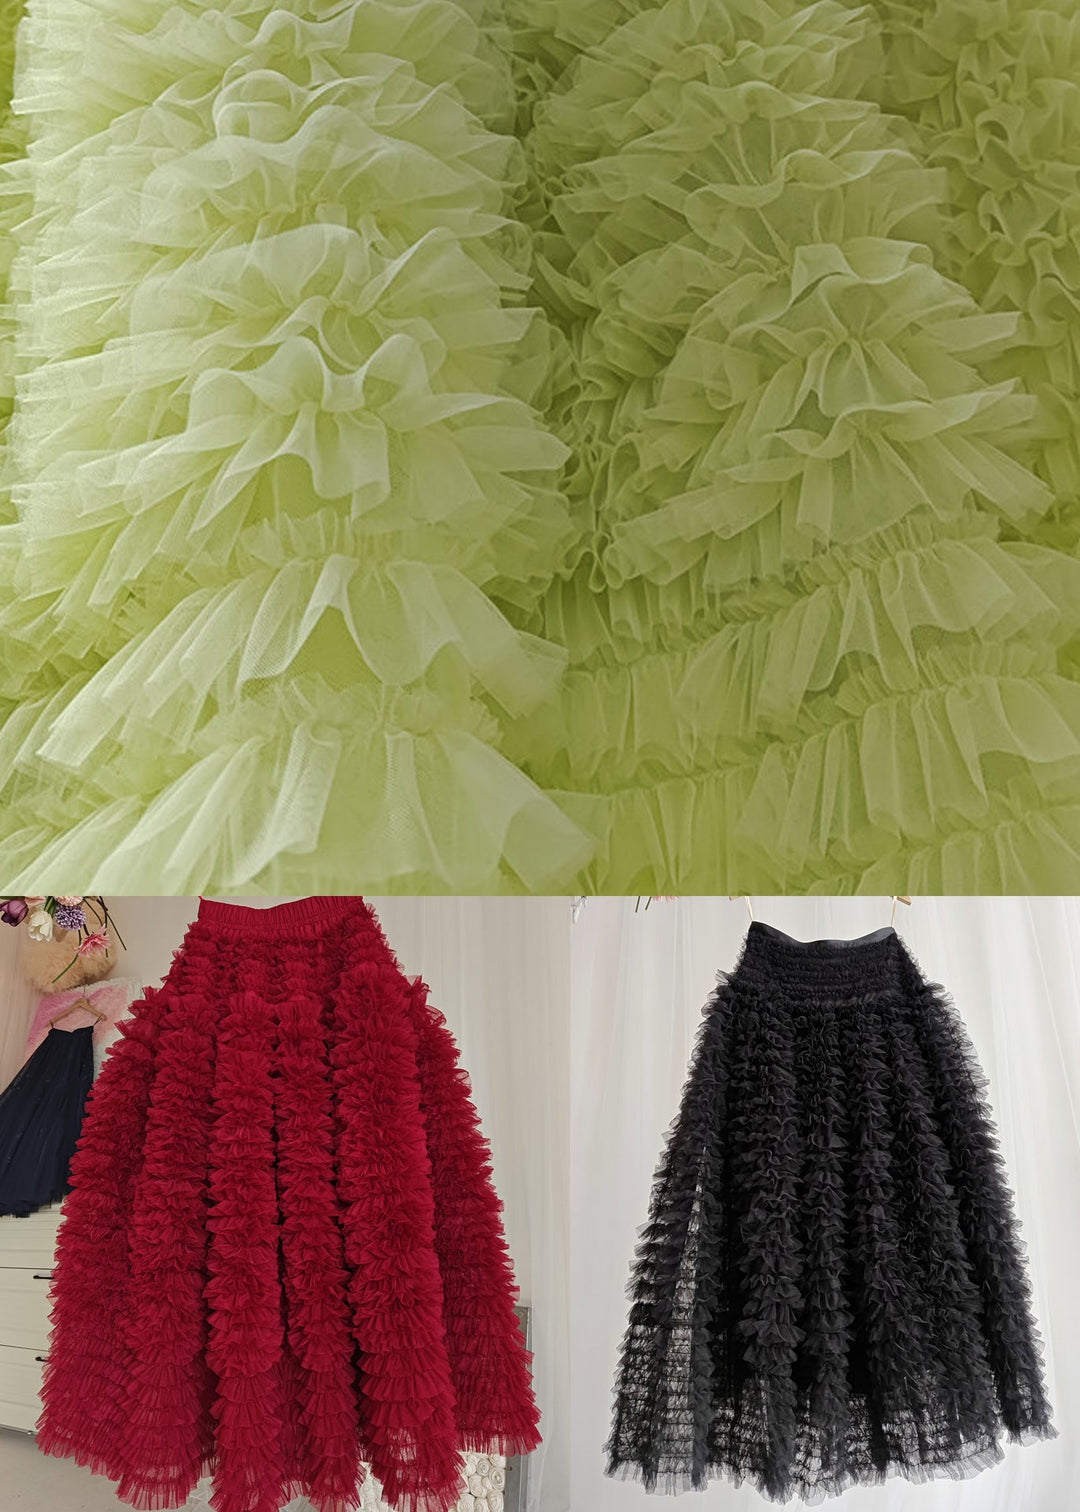 Style Light Green Layered Ruffled Patchwork Tulle Skirt Spring